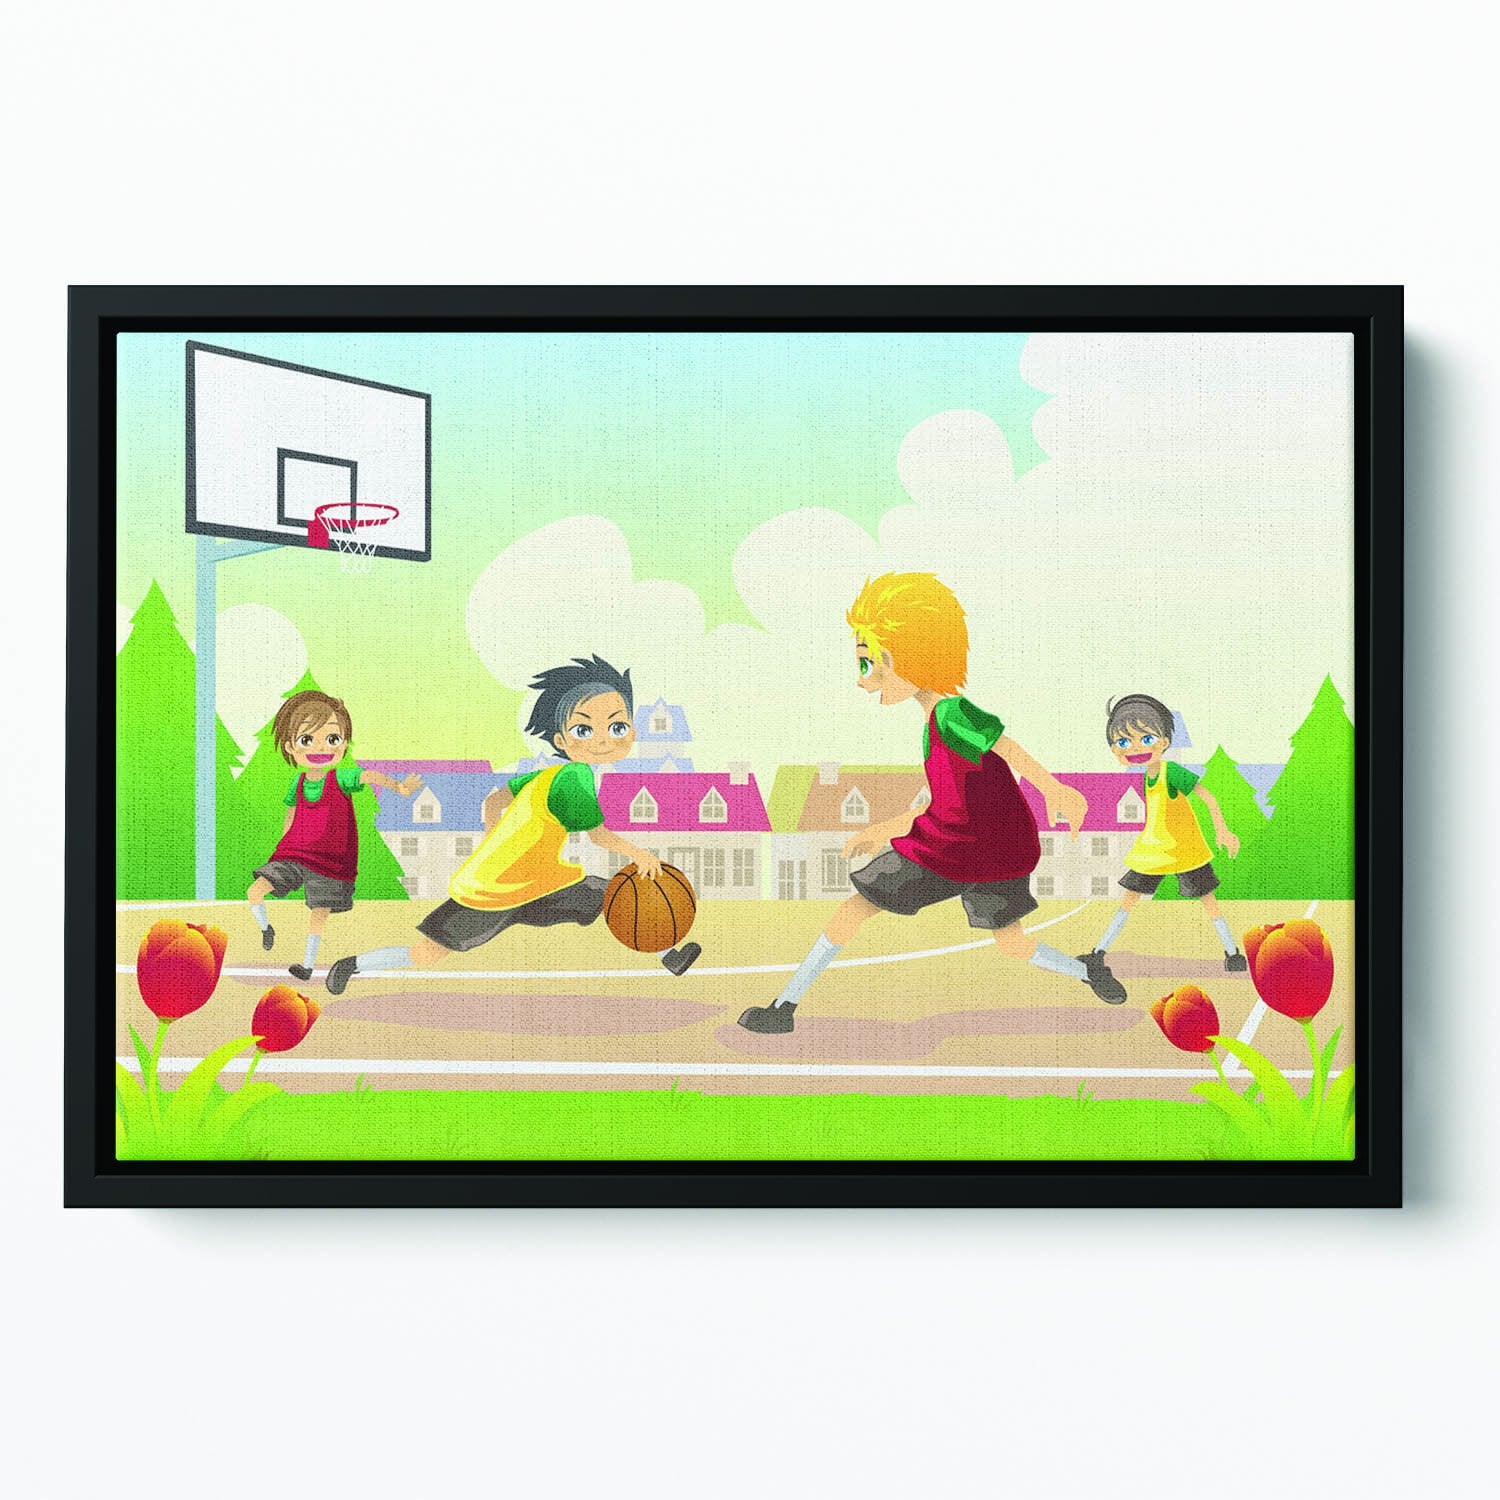 Kids playing basketball in the suburban area Floating Framed Canvas